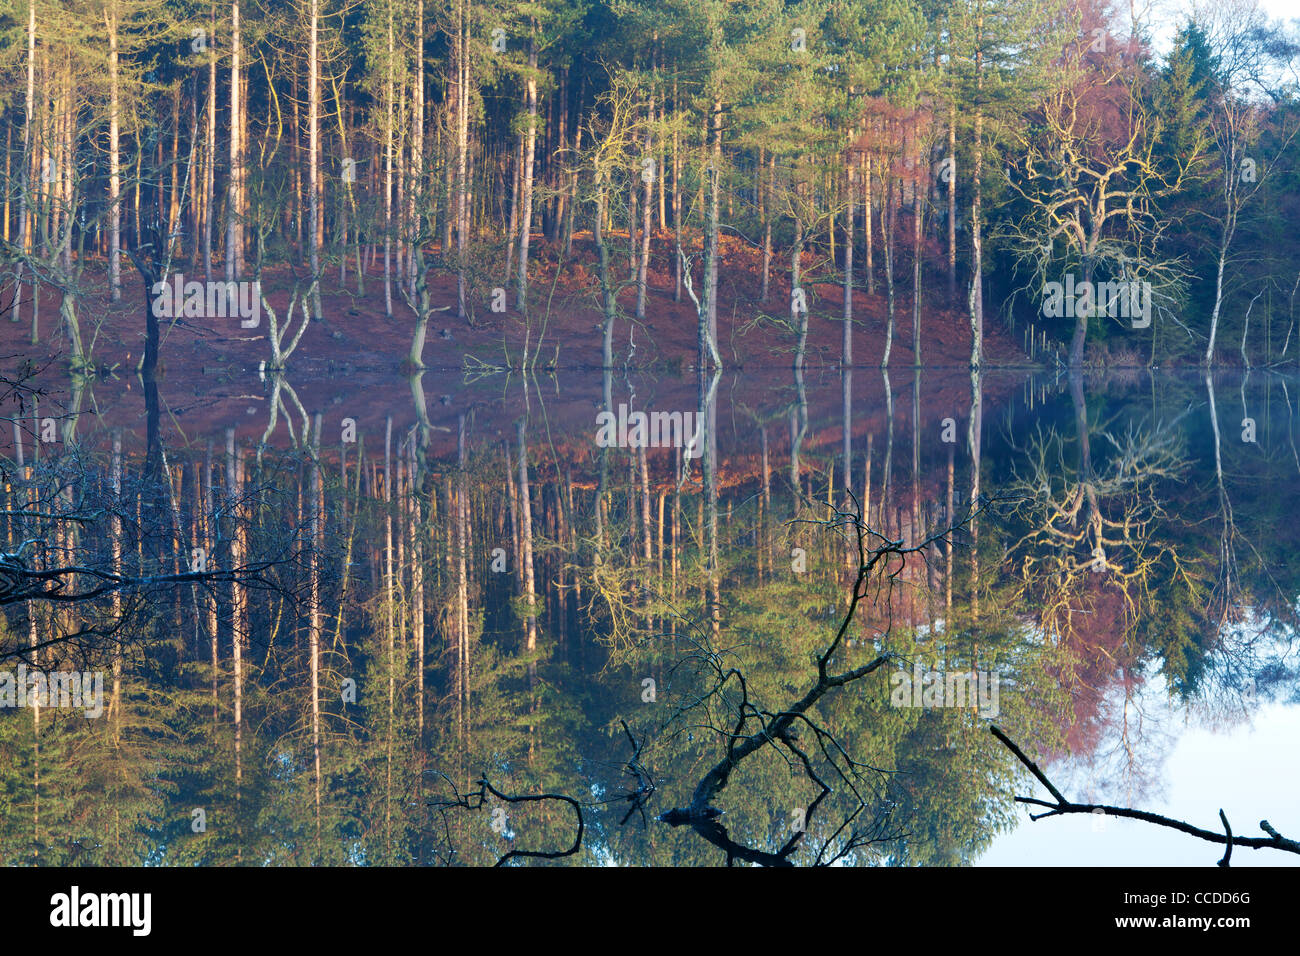 Horizontal Photograph of a Lake in Delemere forest, Cheshire Stock Photo